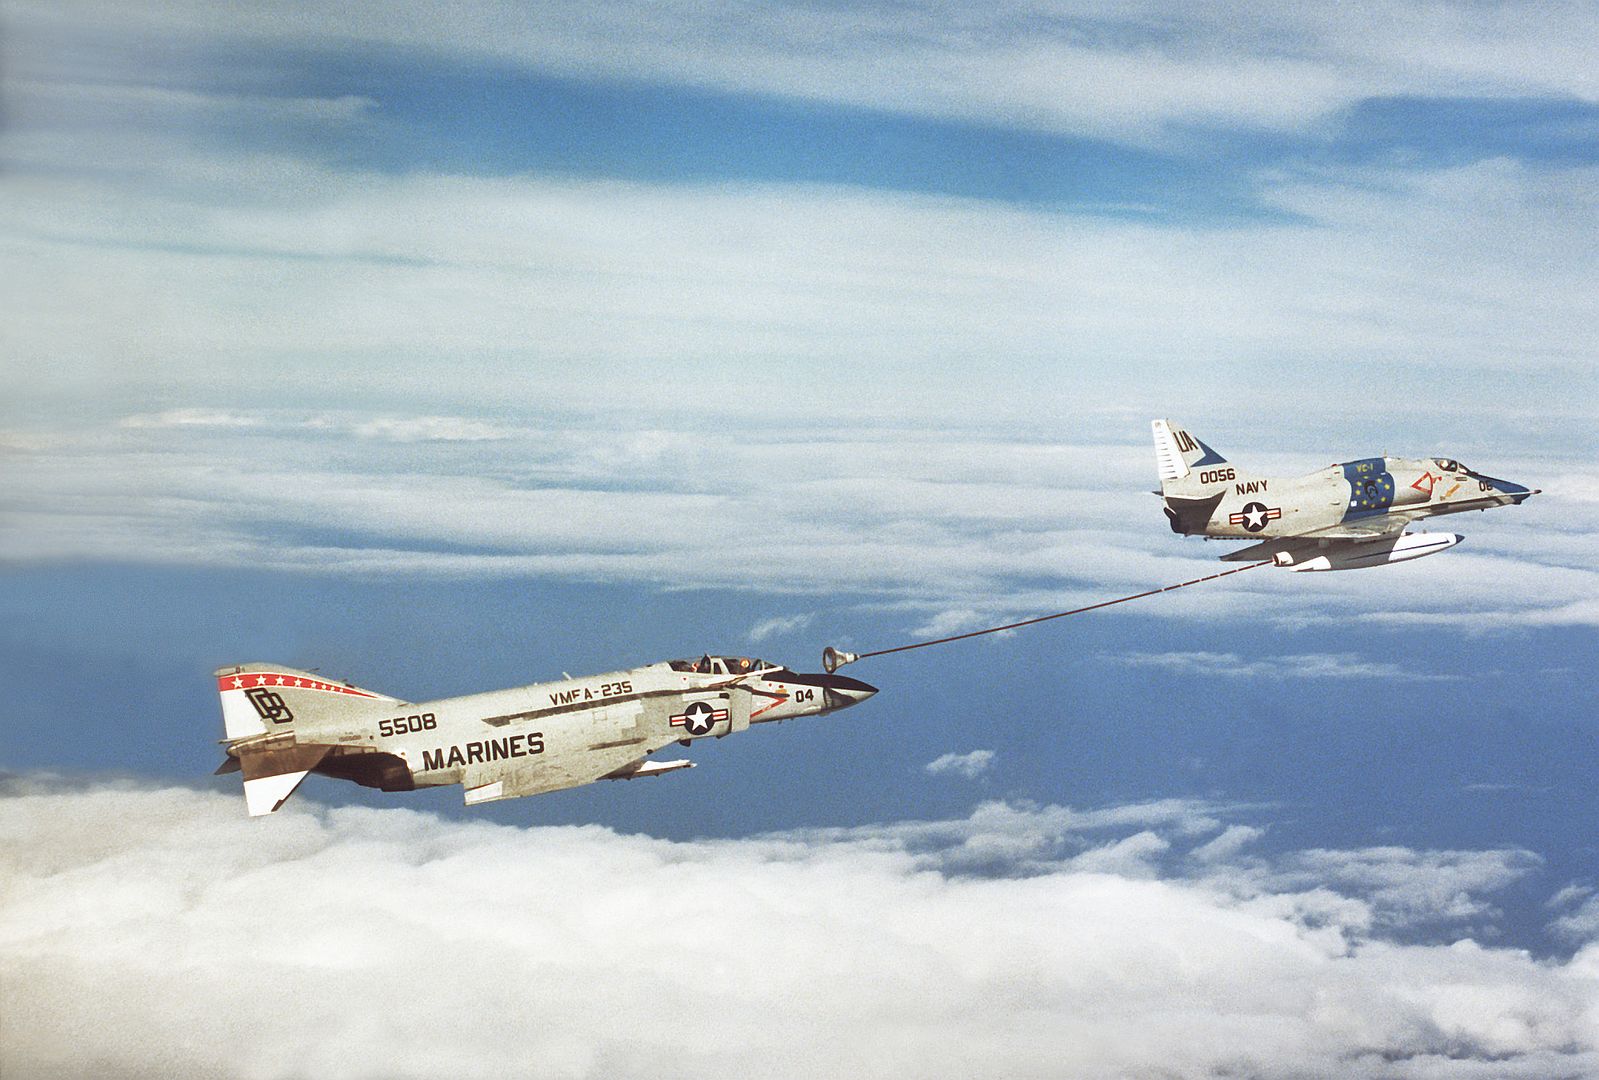 4J Phantom II Aircraft From Marine Corps Fighter Squadron 235